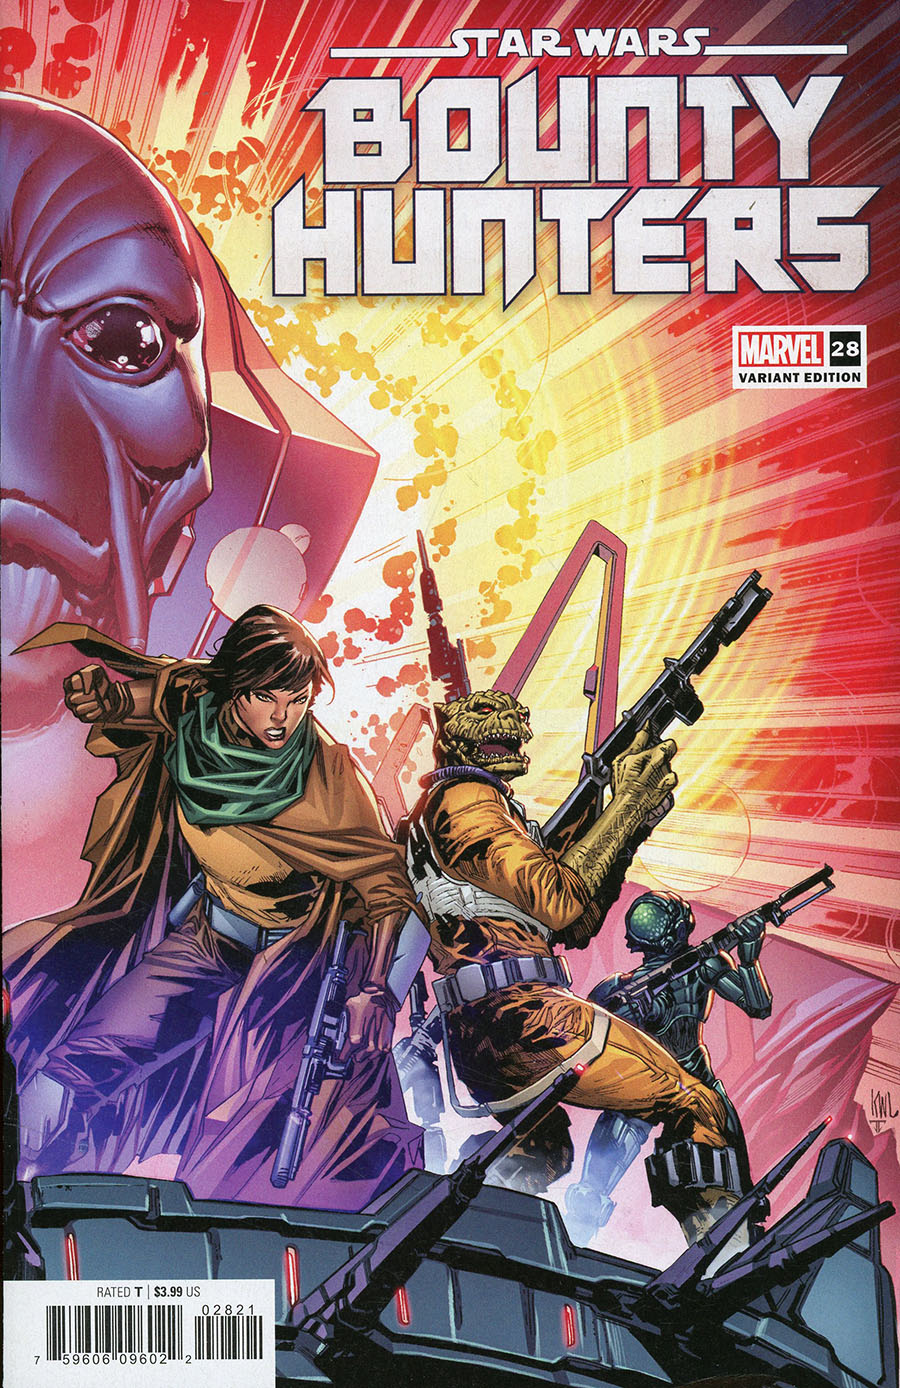 Star Wars Bounty Hunters #28 Cover C Variant Ken Lashley Connecting Cover